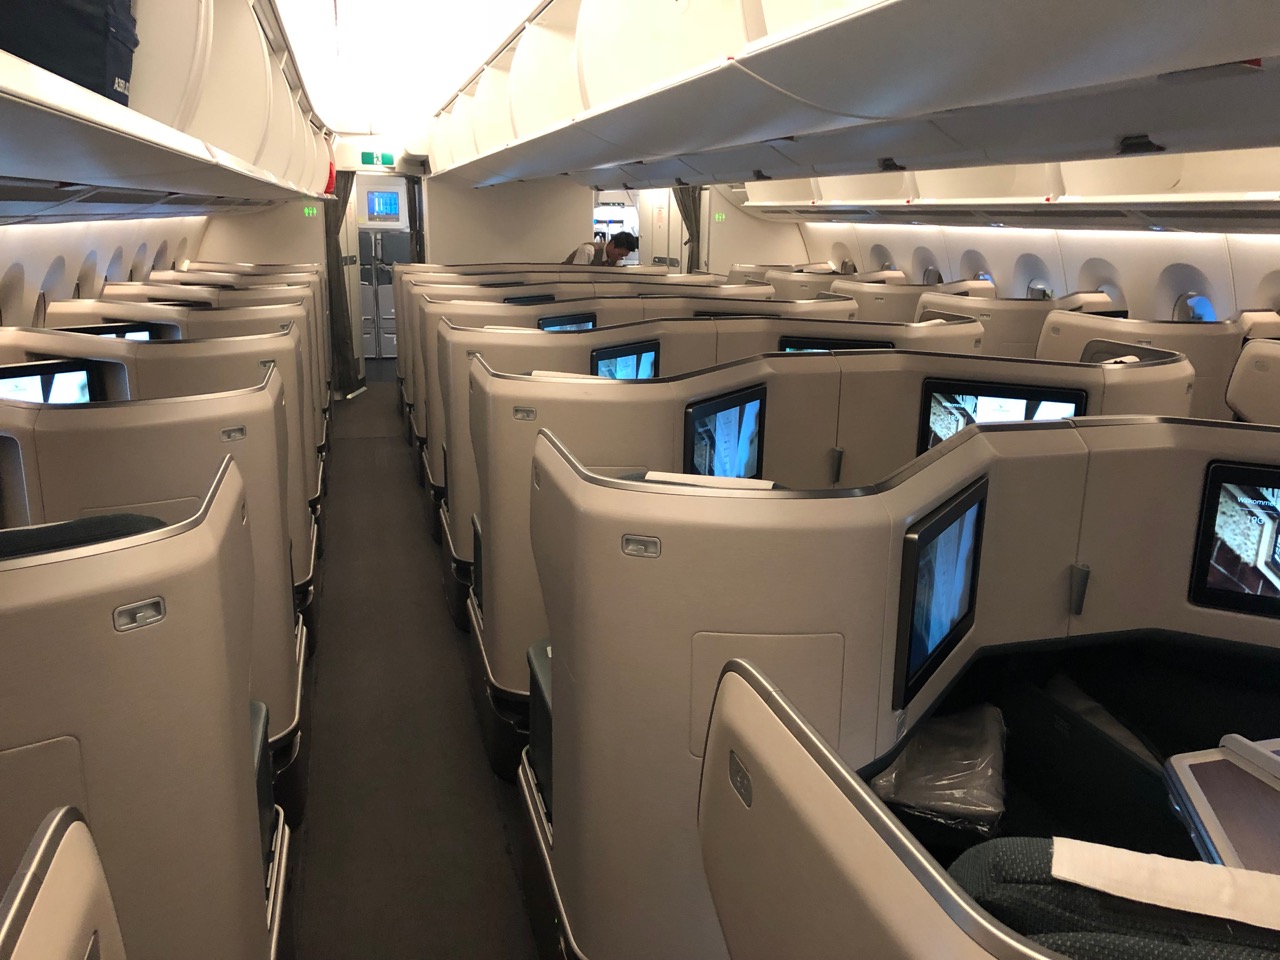 https://monkeymiles.boardingarea.com/wp-content/uploads/2019/03/Cathay-Pacific-Business-Class-A350-Brisbane-to-Hong-Kong_1709.jpg